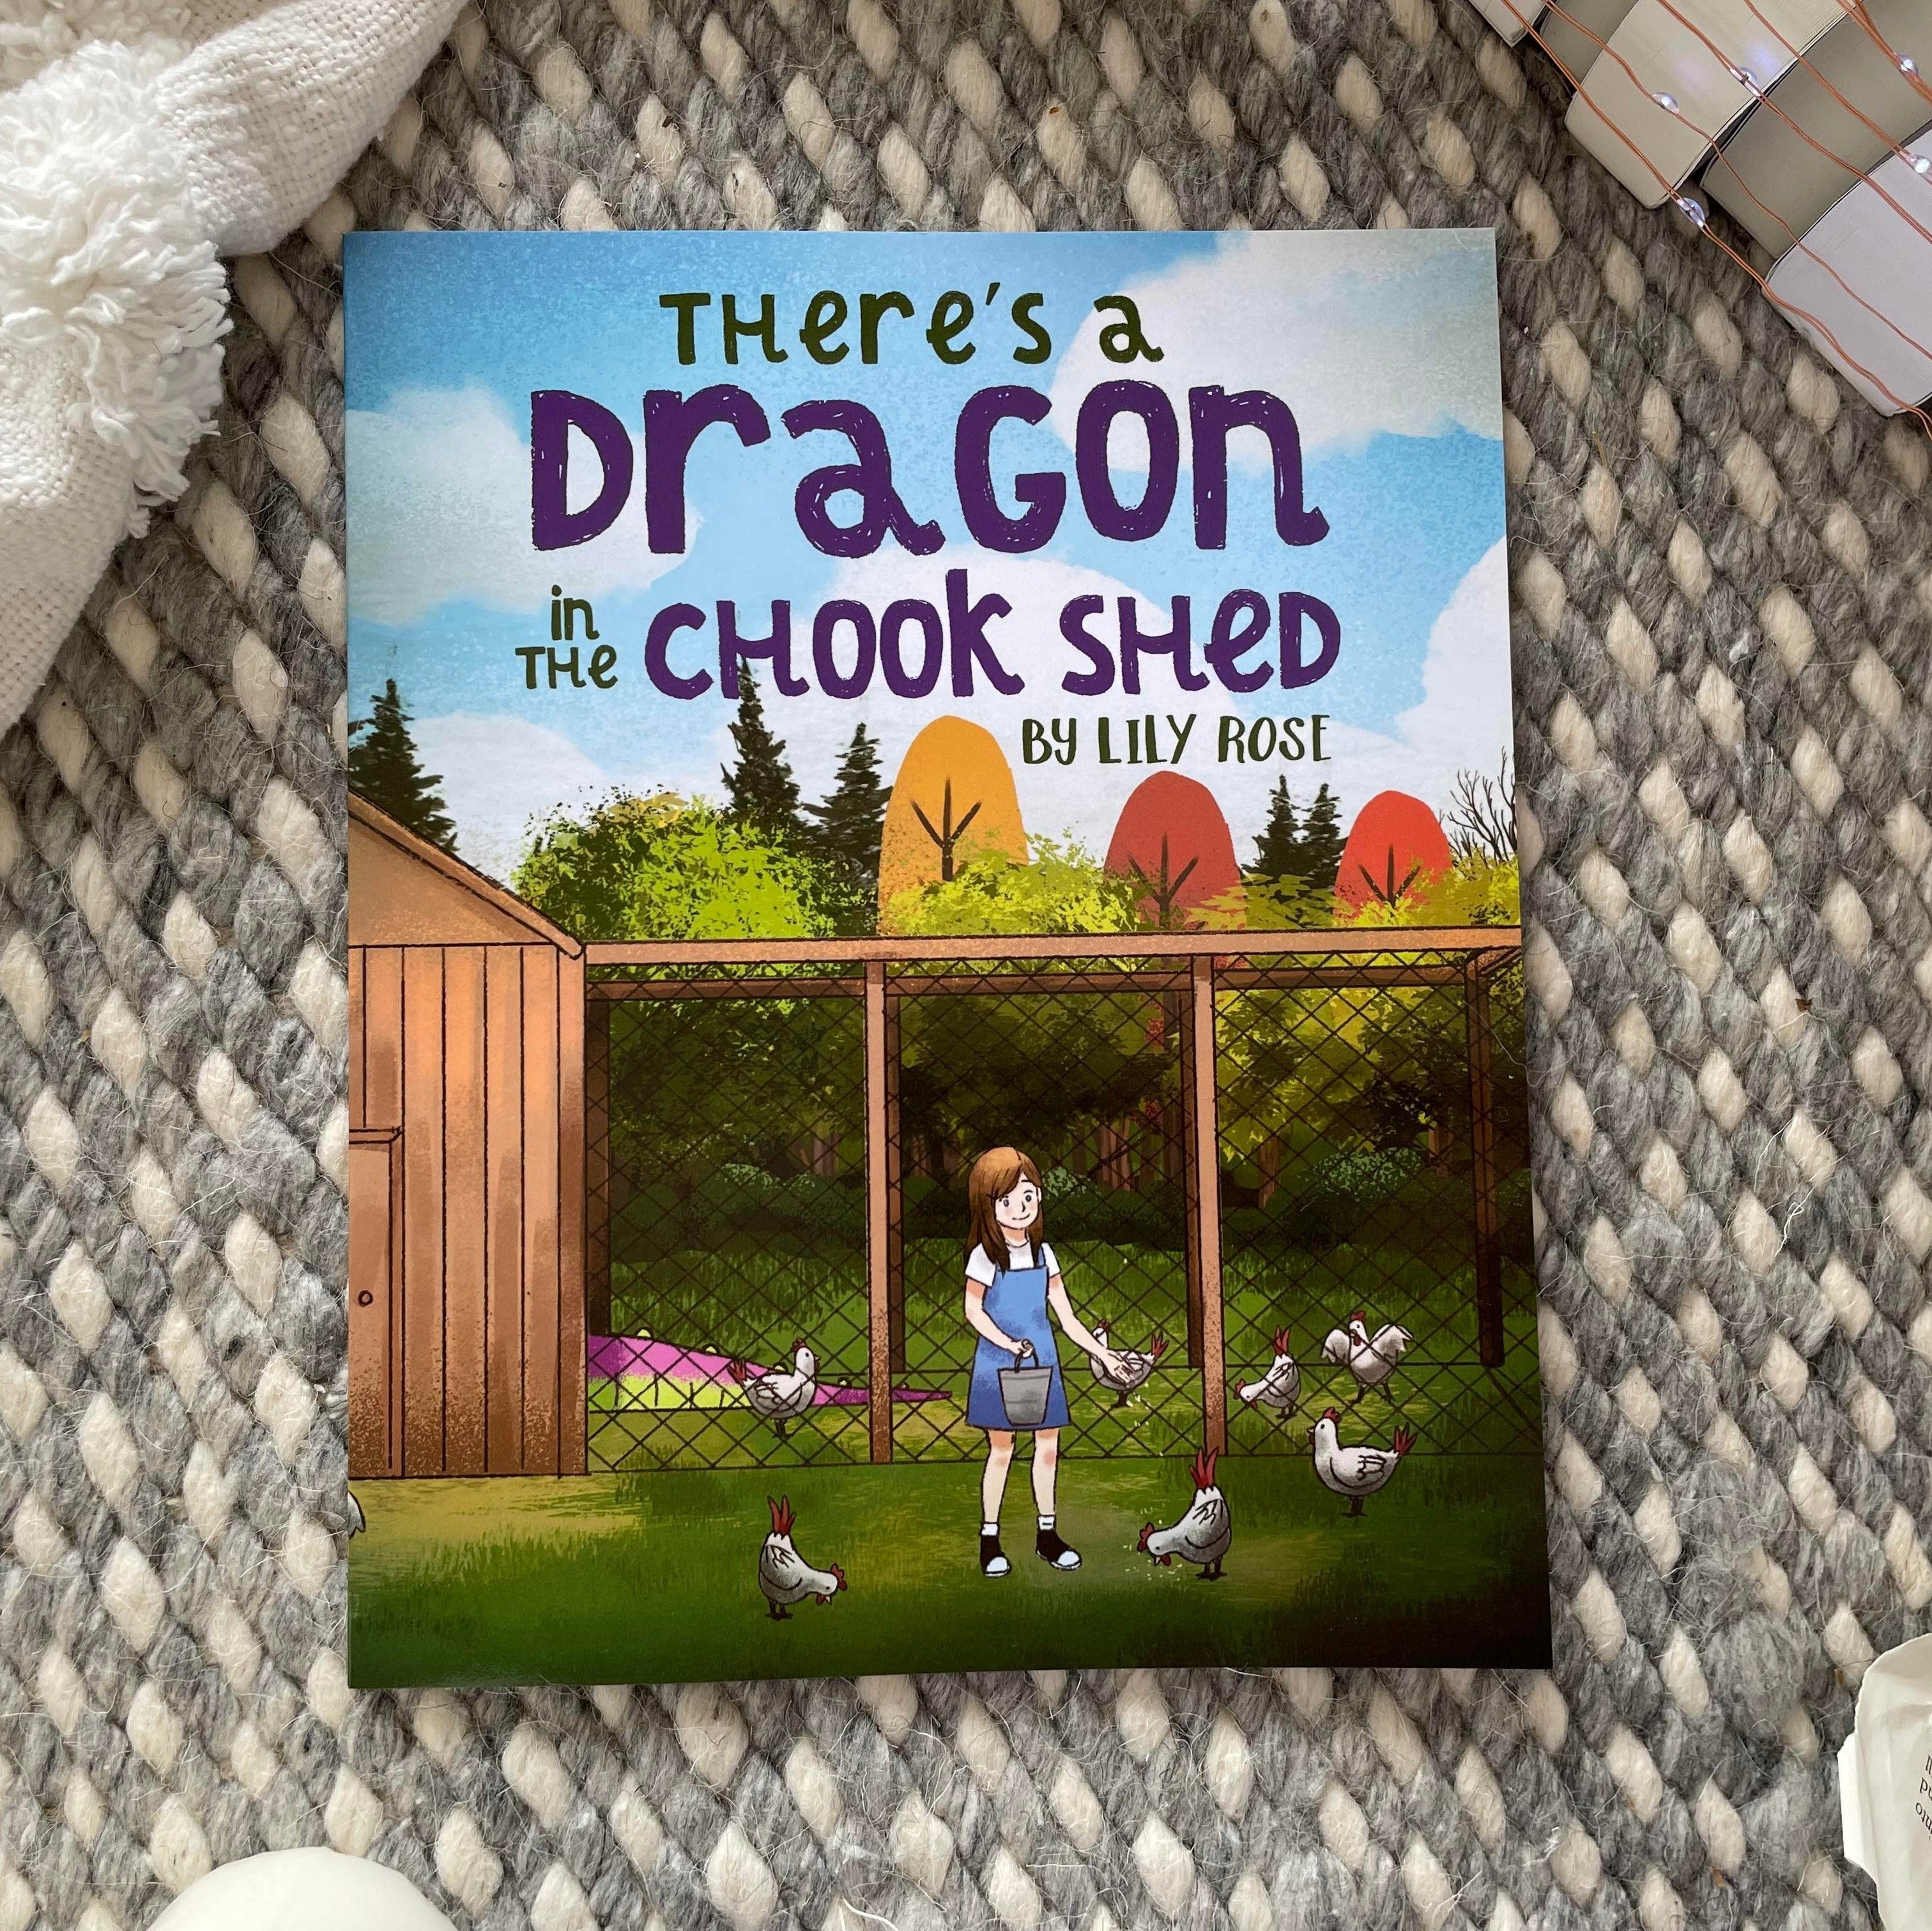 There's a Dragon in the Chook Shed by Lily Rose